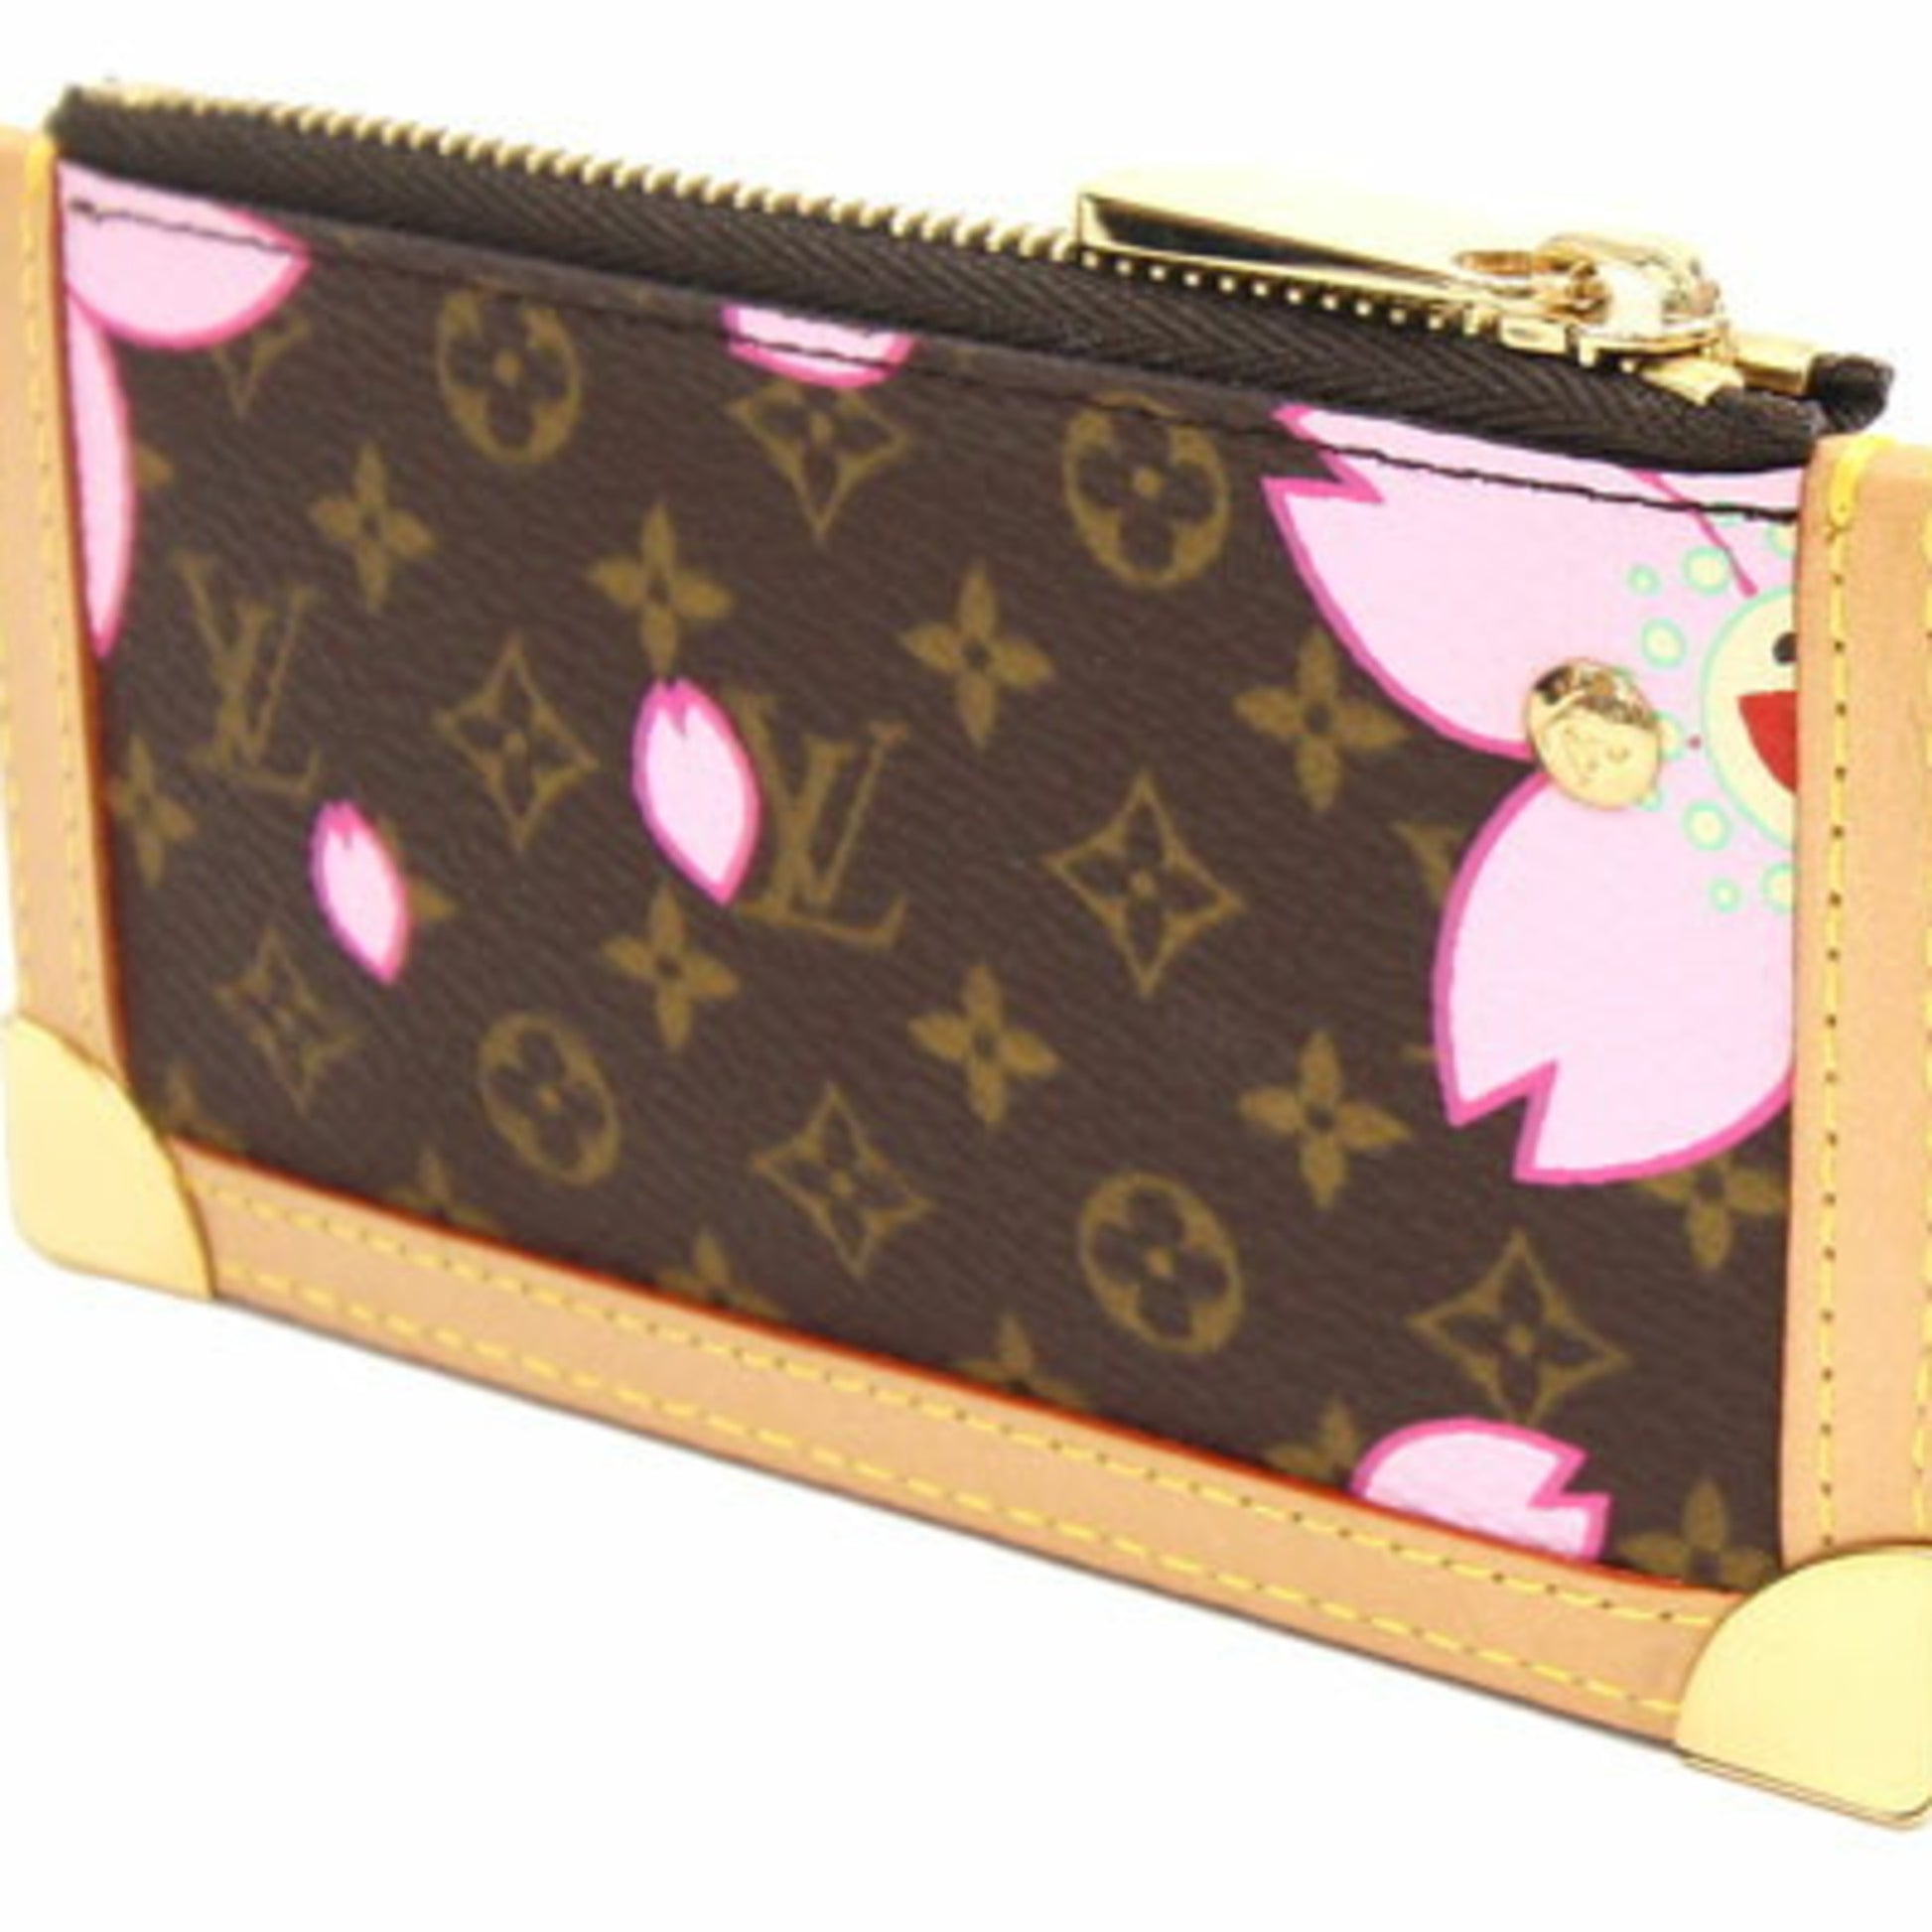 LOUIS VUITTON Monogram Cherry Blossom Pouch Bag In Brown - Pink